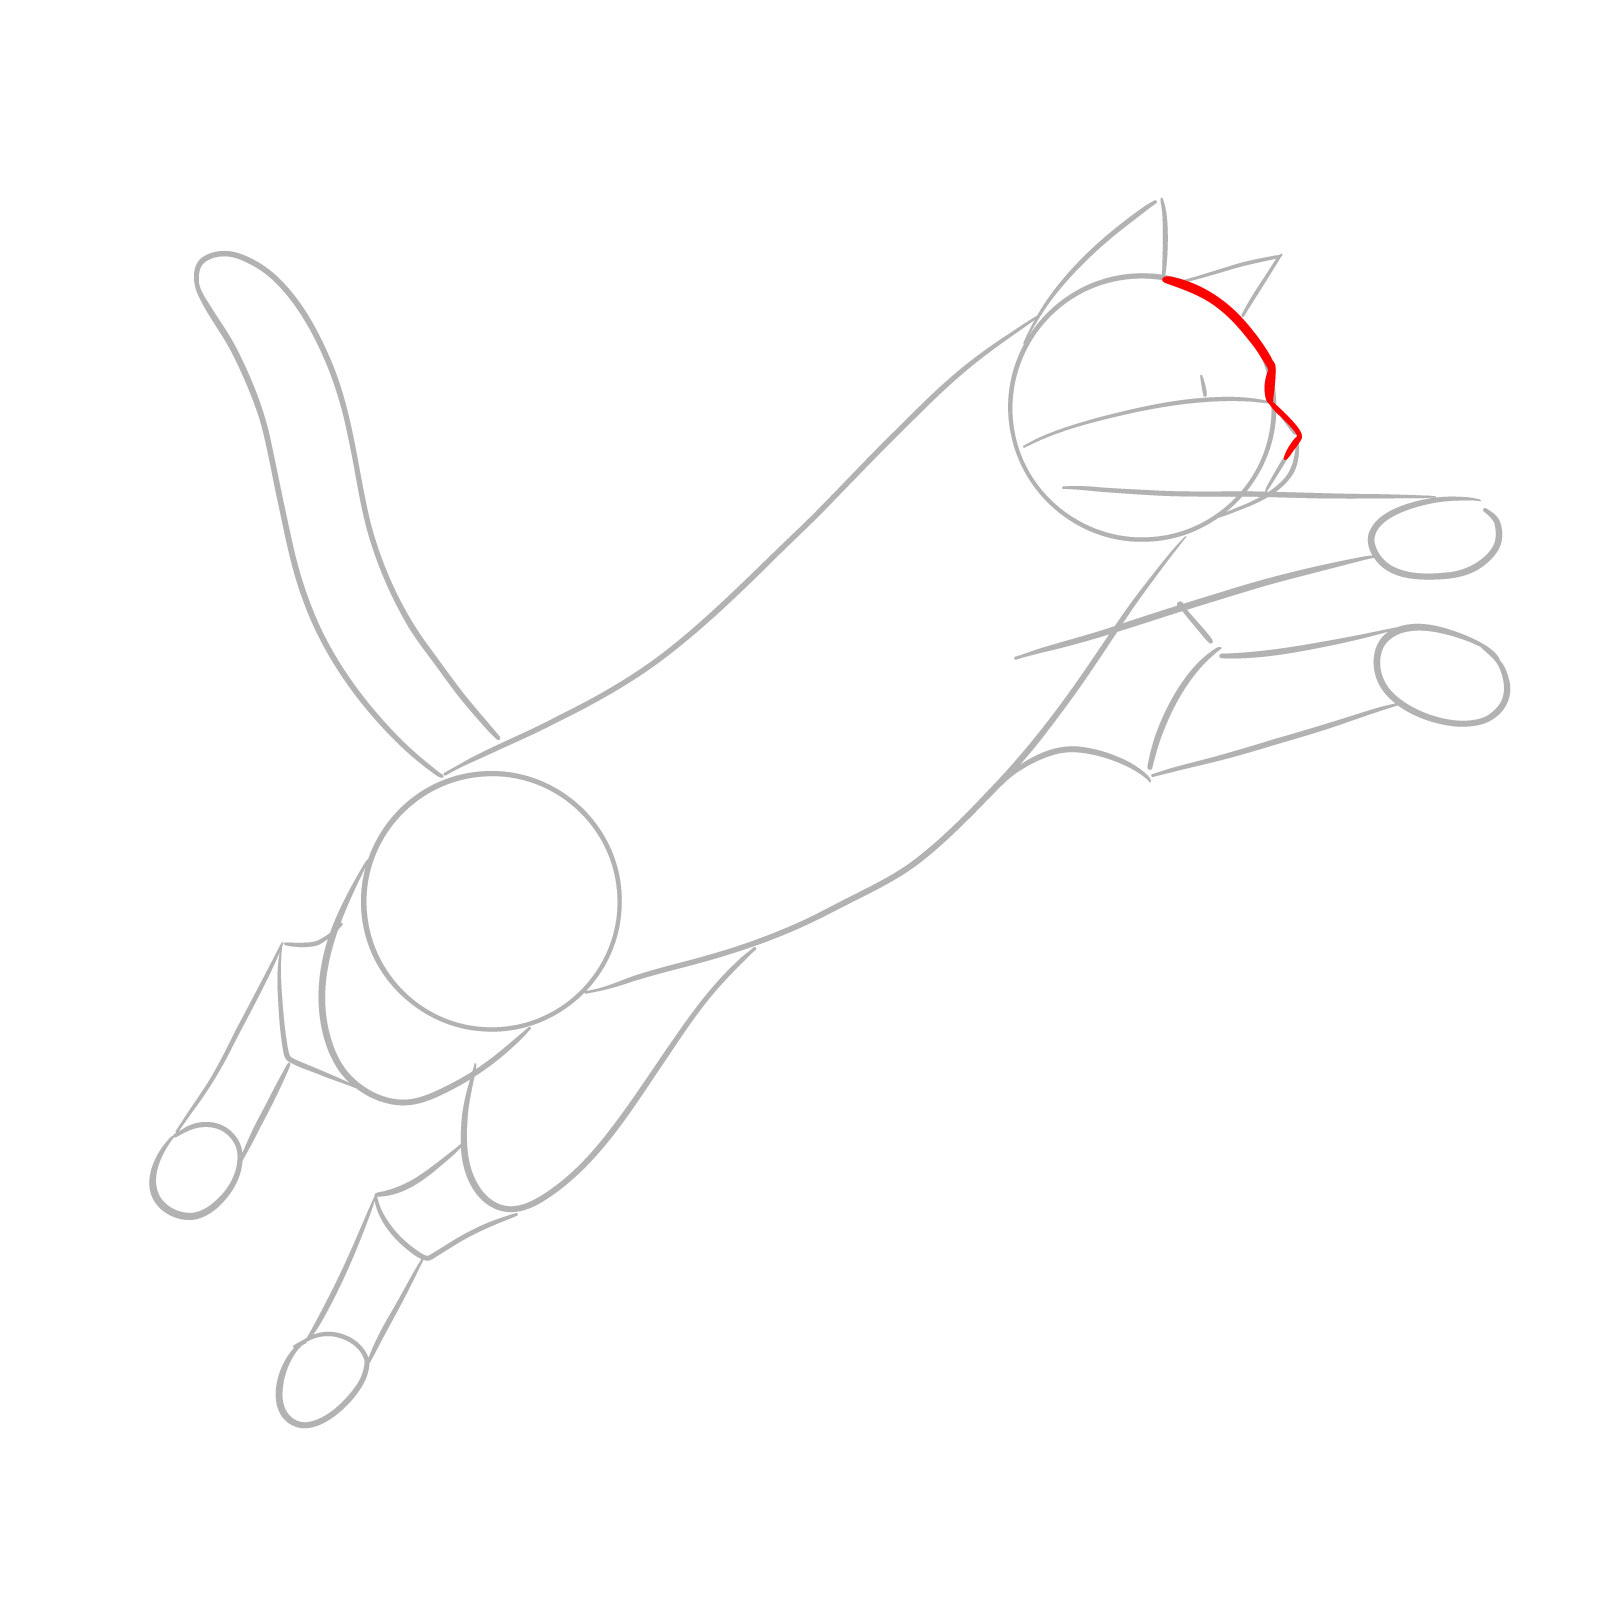 Sketch detailing the front part of a cat's head and nose for an illustration of a cat in a jump - step 03